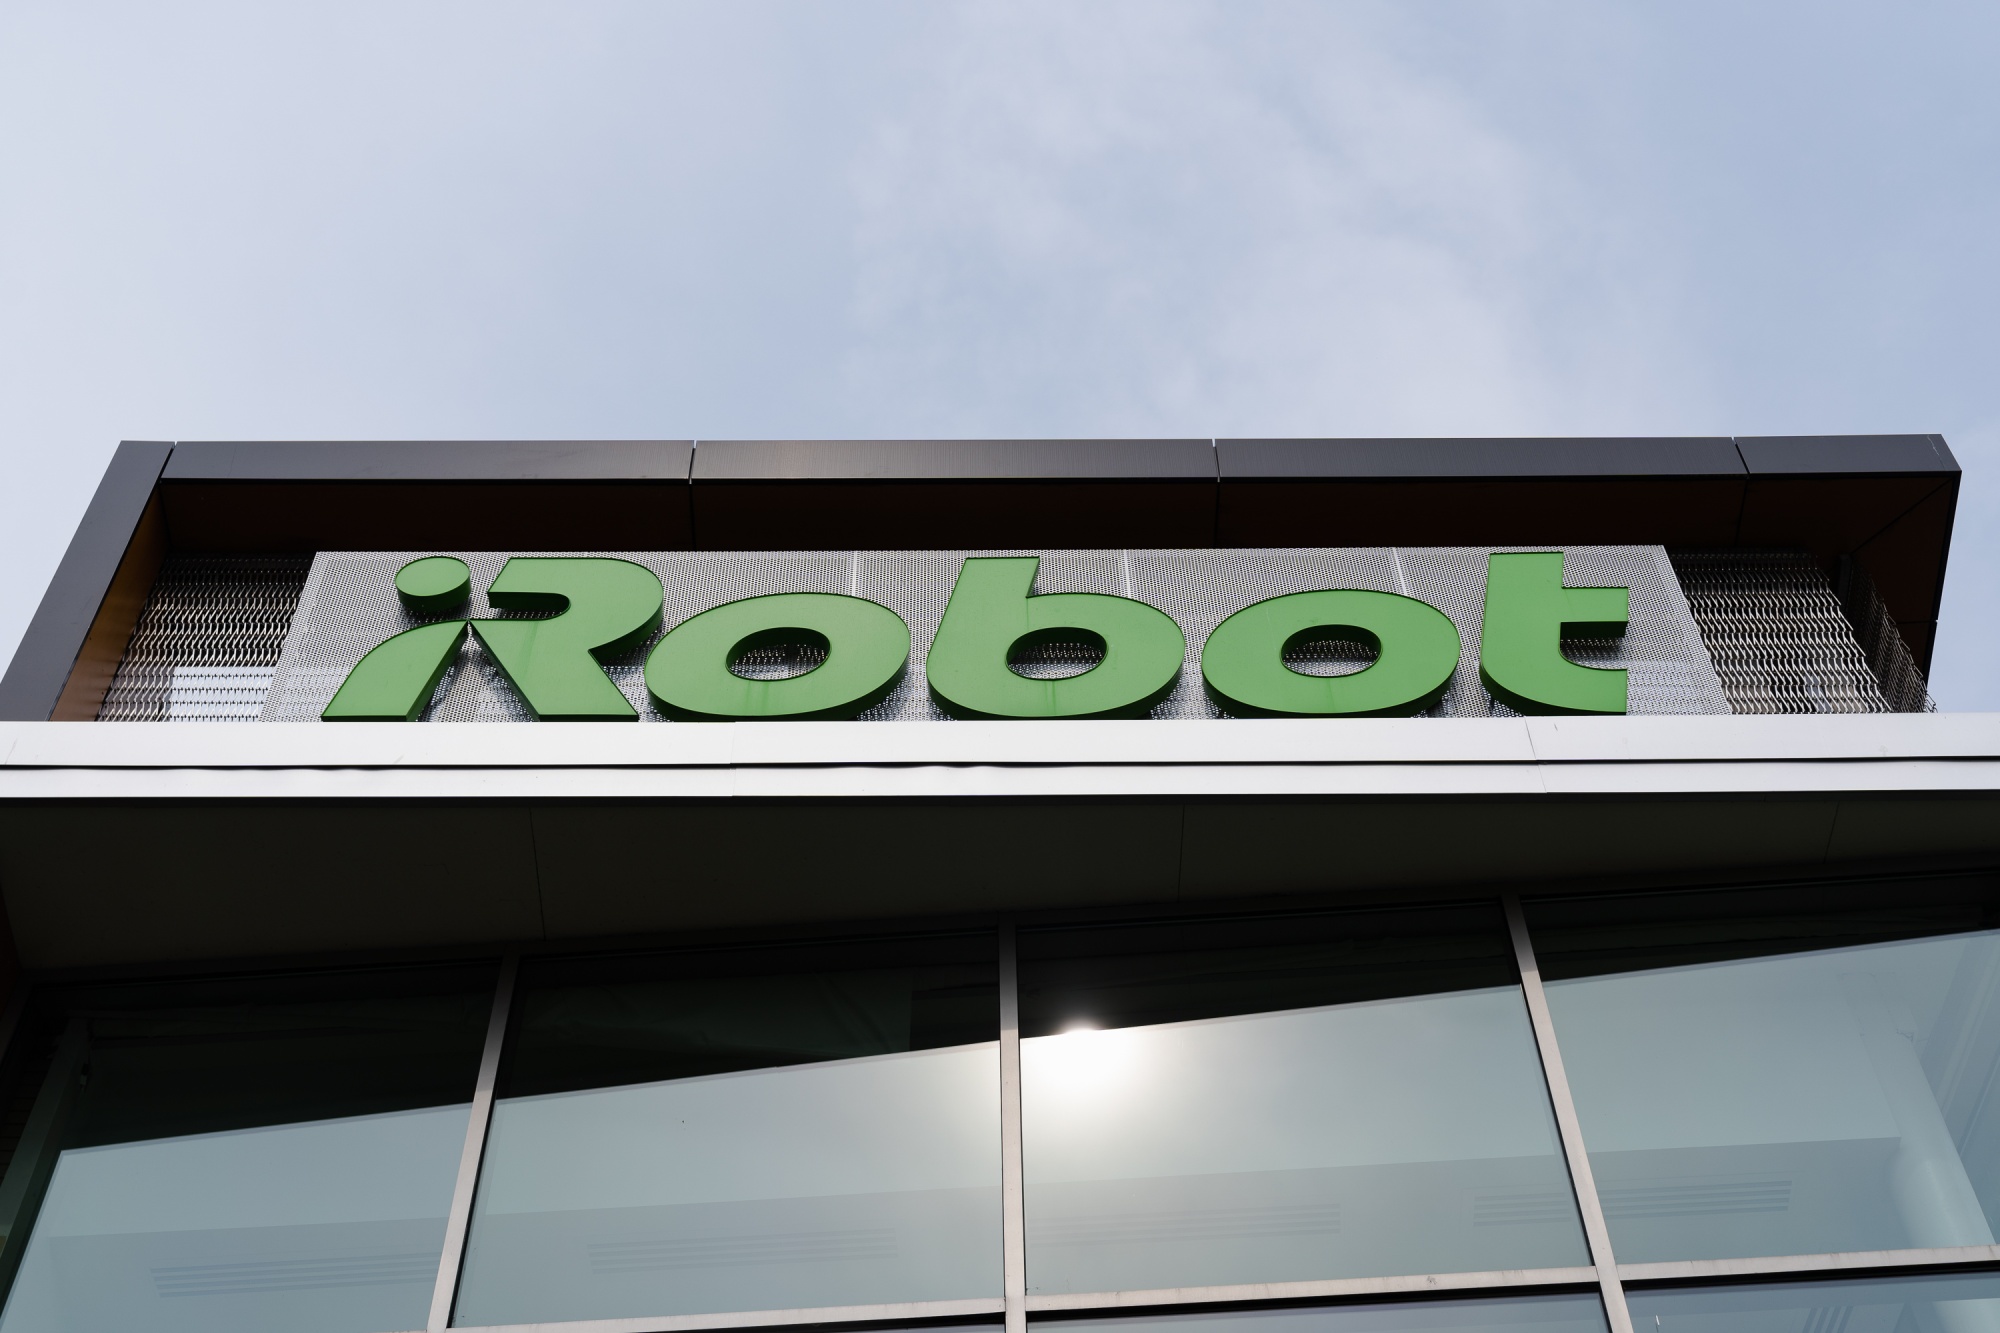 Exclusive:  to win unconditional EU nod for iRobot deal